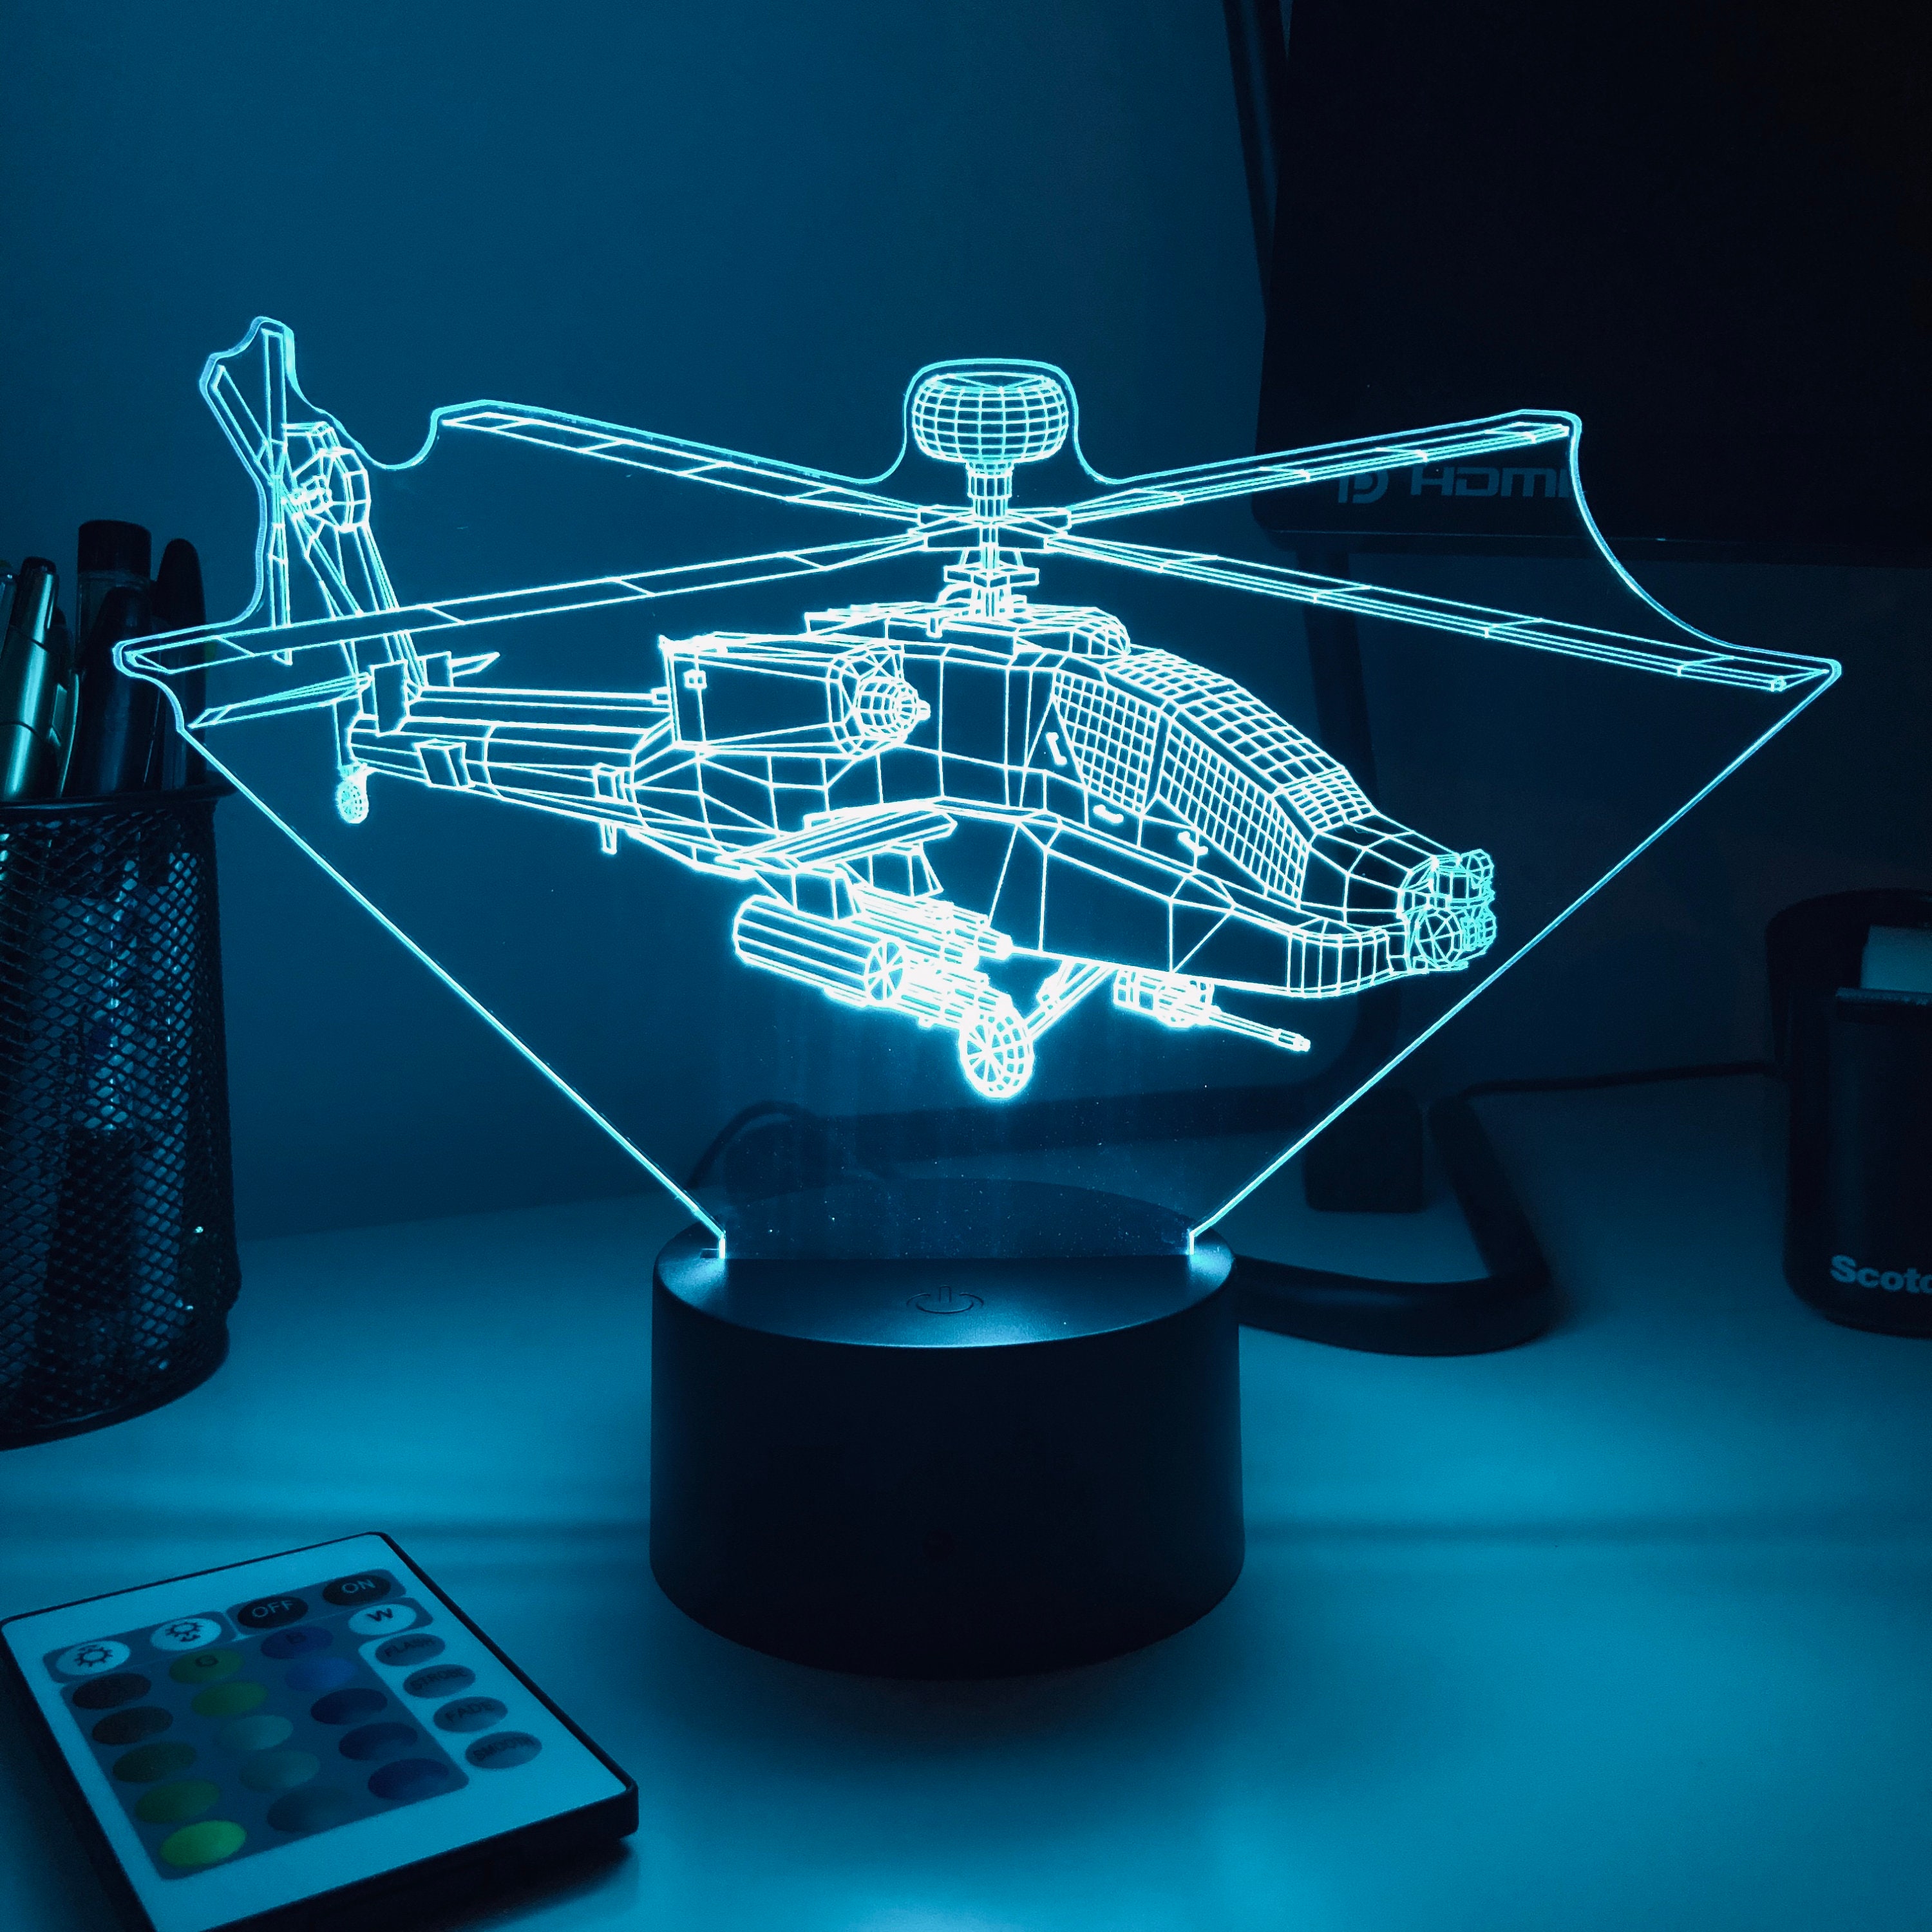 With Remote 3D Optical Illusion Lamp AH-64 Apache Helicopter 